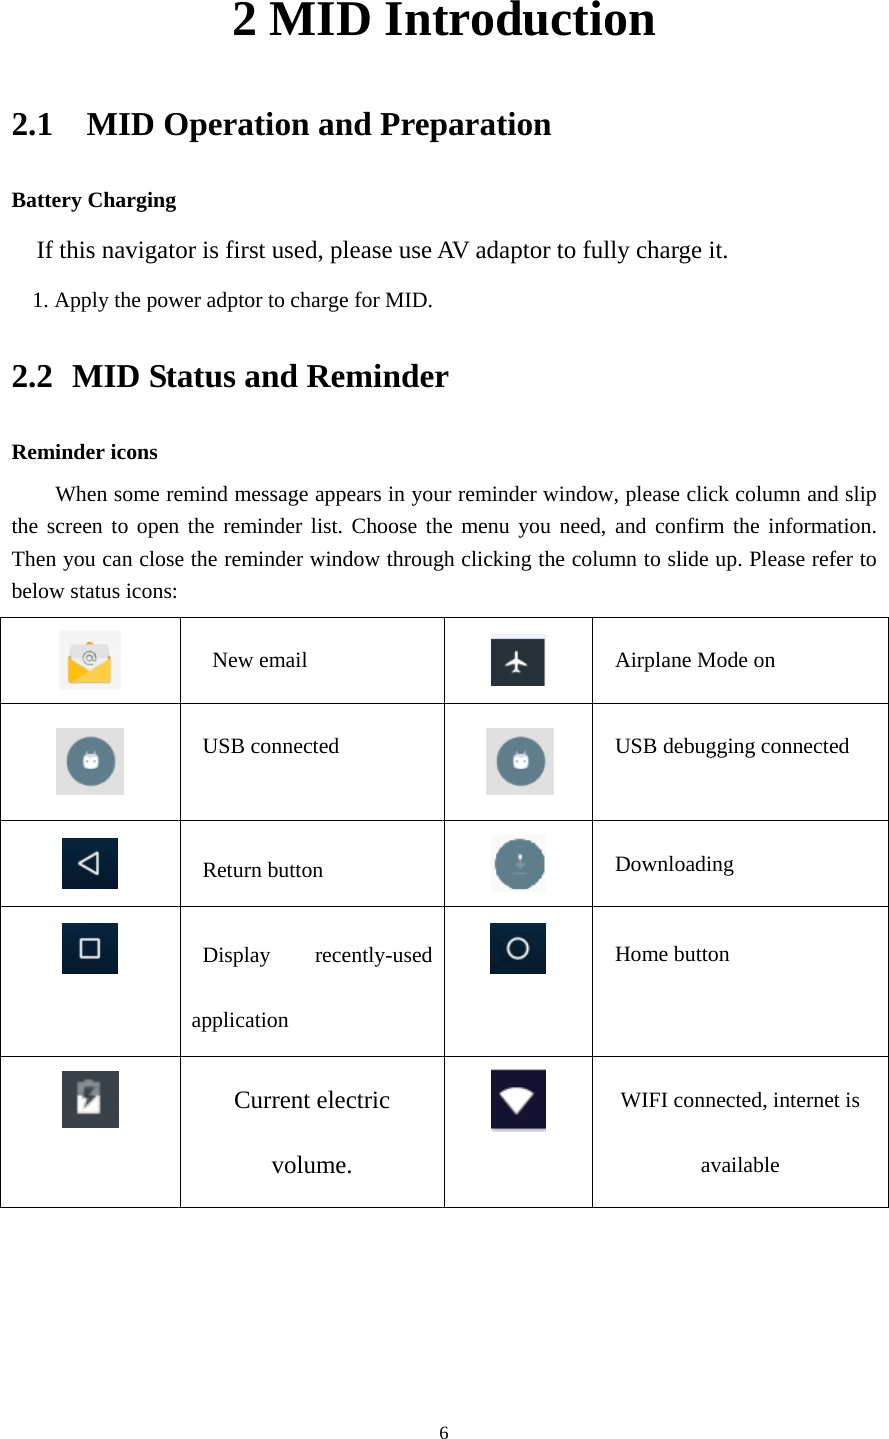     62 MID Introduction 2.1  MID Operation and Preparation Battery Charging If this navigator is first used, please use AV adaptor to fully charge it. 1. Apply the power adptor to charge for MID. 2.2   MID Status and Reminder Reminder icons When some remind message appears in your reminder window, please click column and slip the screen to open the reminder list. Choose the menu you need, and confirm the information. Then you can close the reminder window through clicking the column to slide up. Please refer to below status icons:    New email   Airplane Mode on  USB connected  USB debugging connected  Return button  Downloading  Display recently-used application  Home button  Current electric volume.  WIFI connected, internet is available     